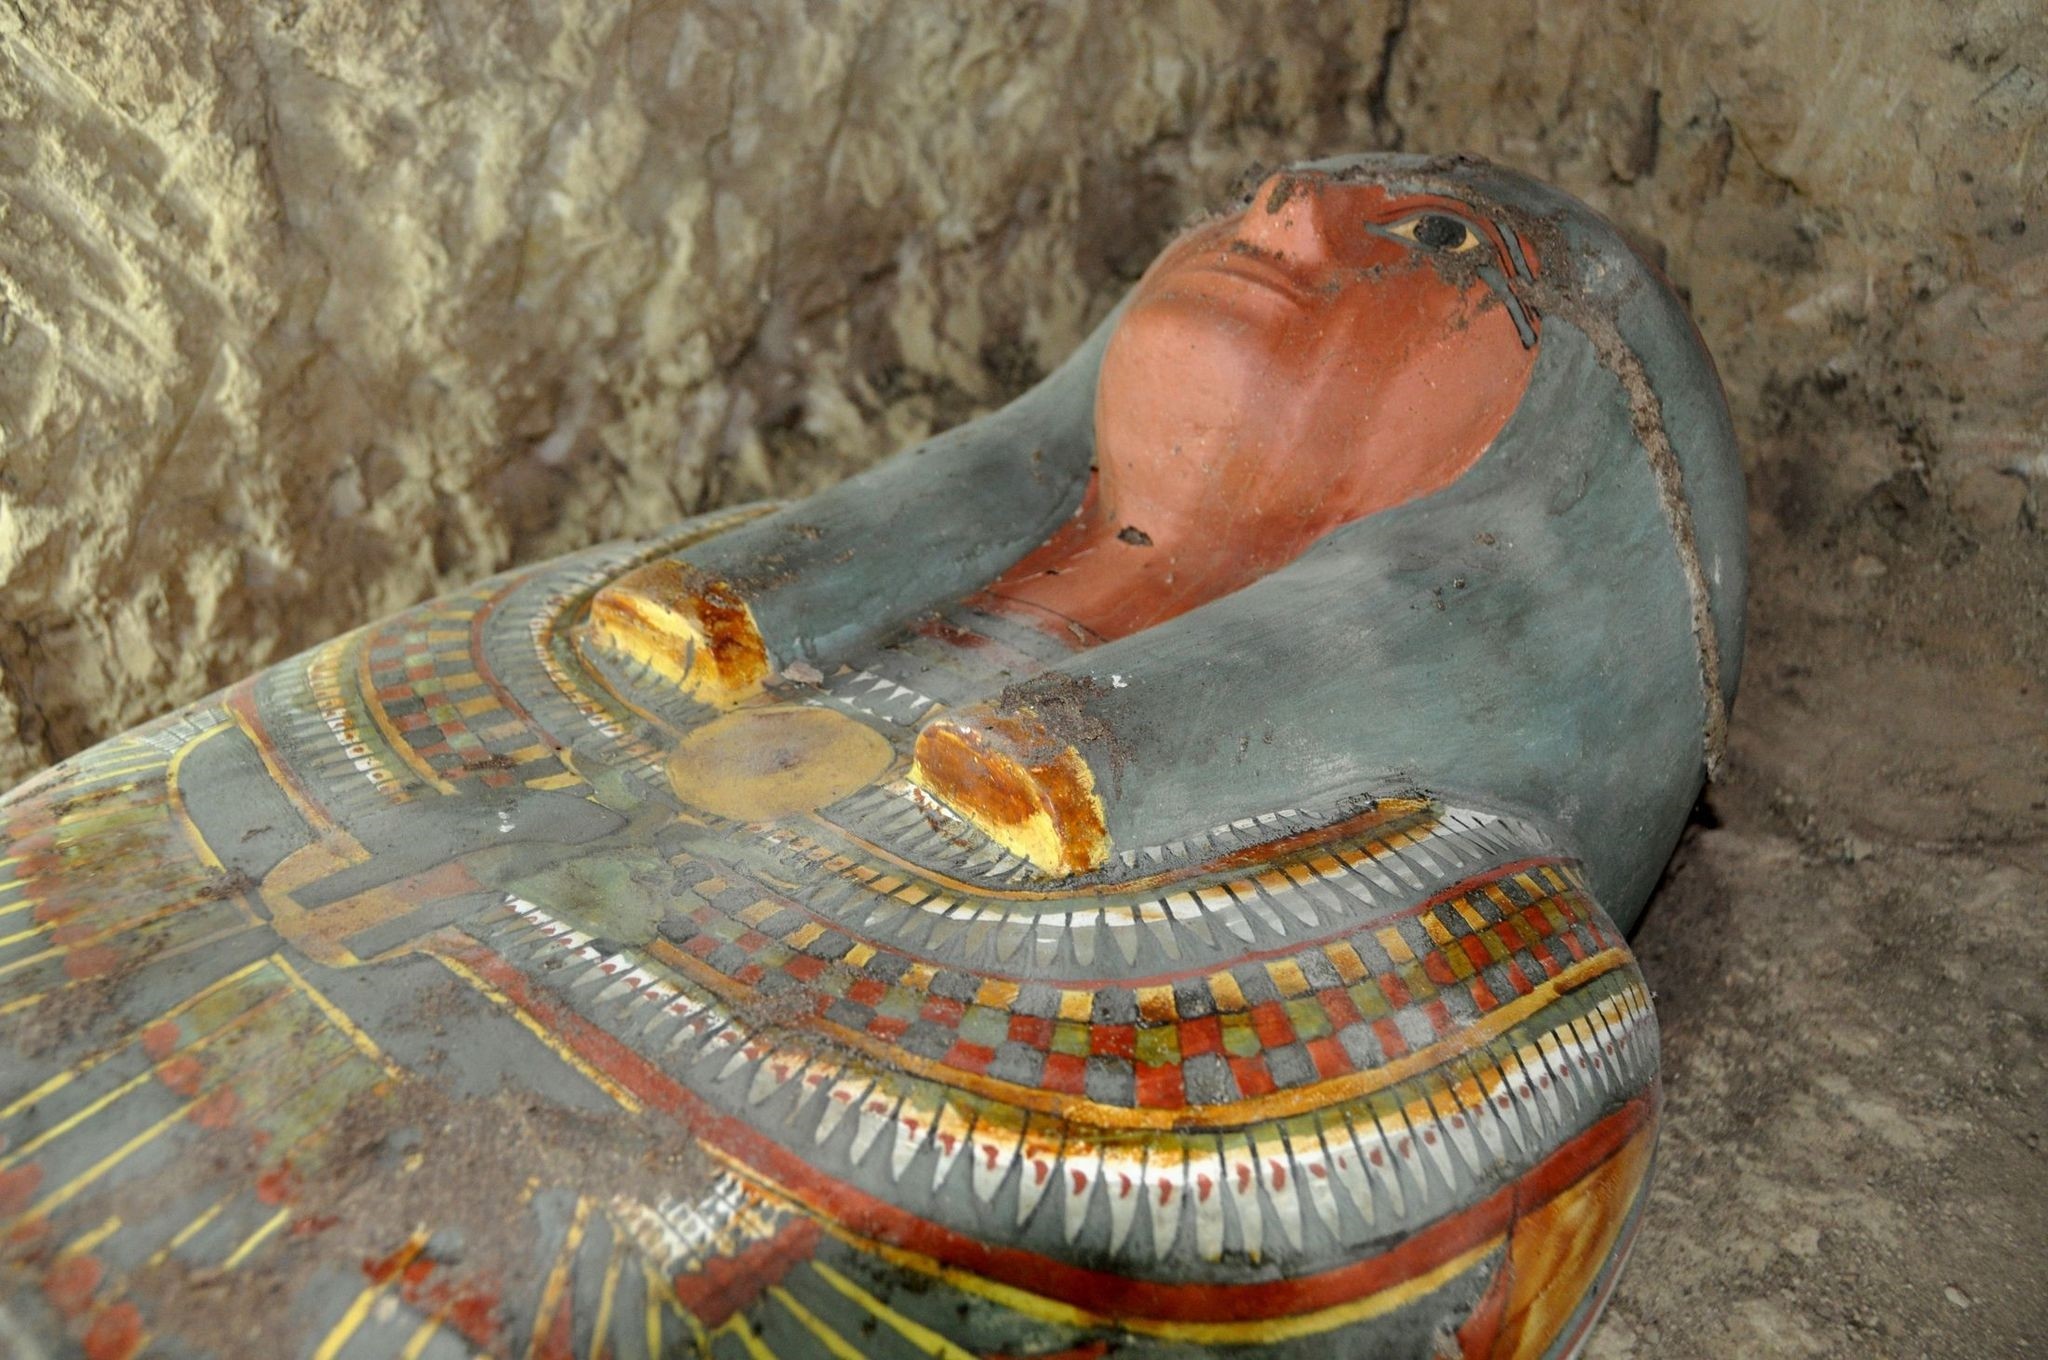 A sarcophagus containing a millennia-old mummy which was found by Spanish archaeologists near the southern Egyptian town of Luxor. (AFP Photo)